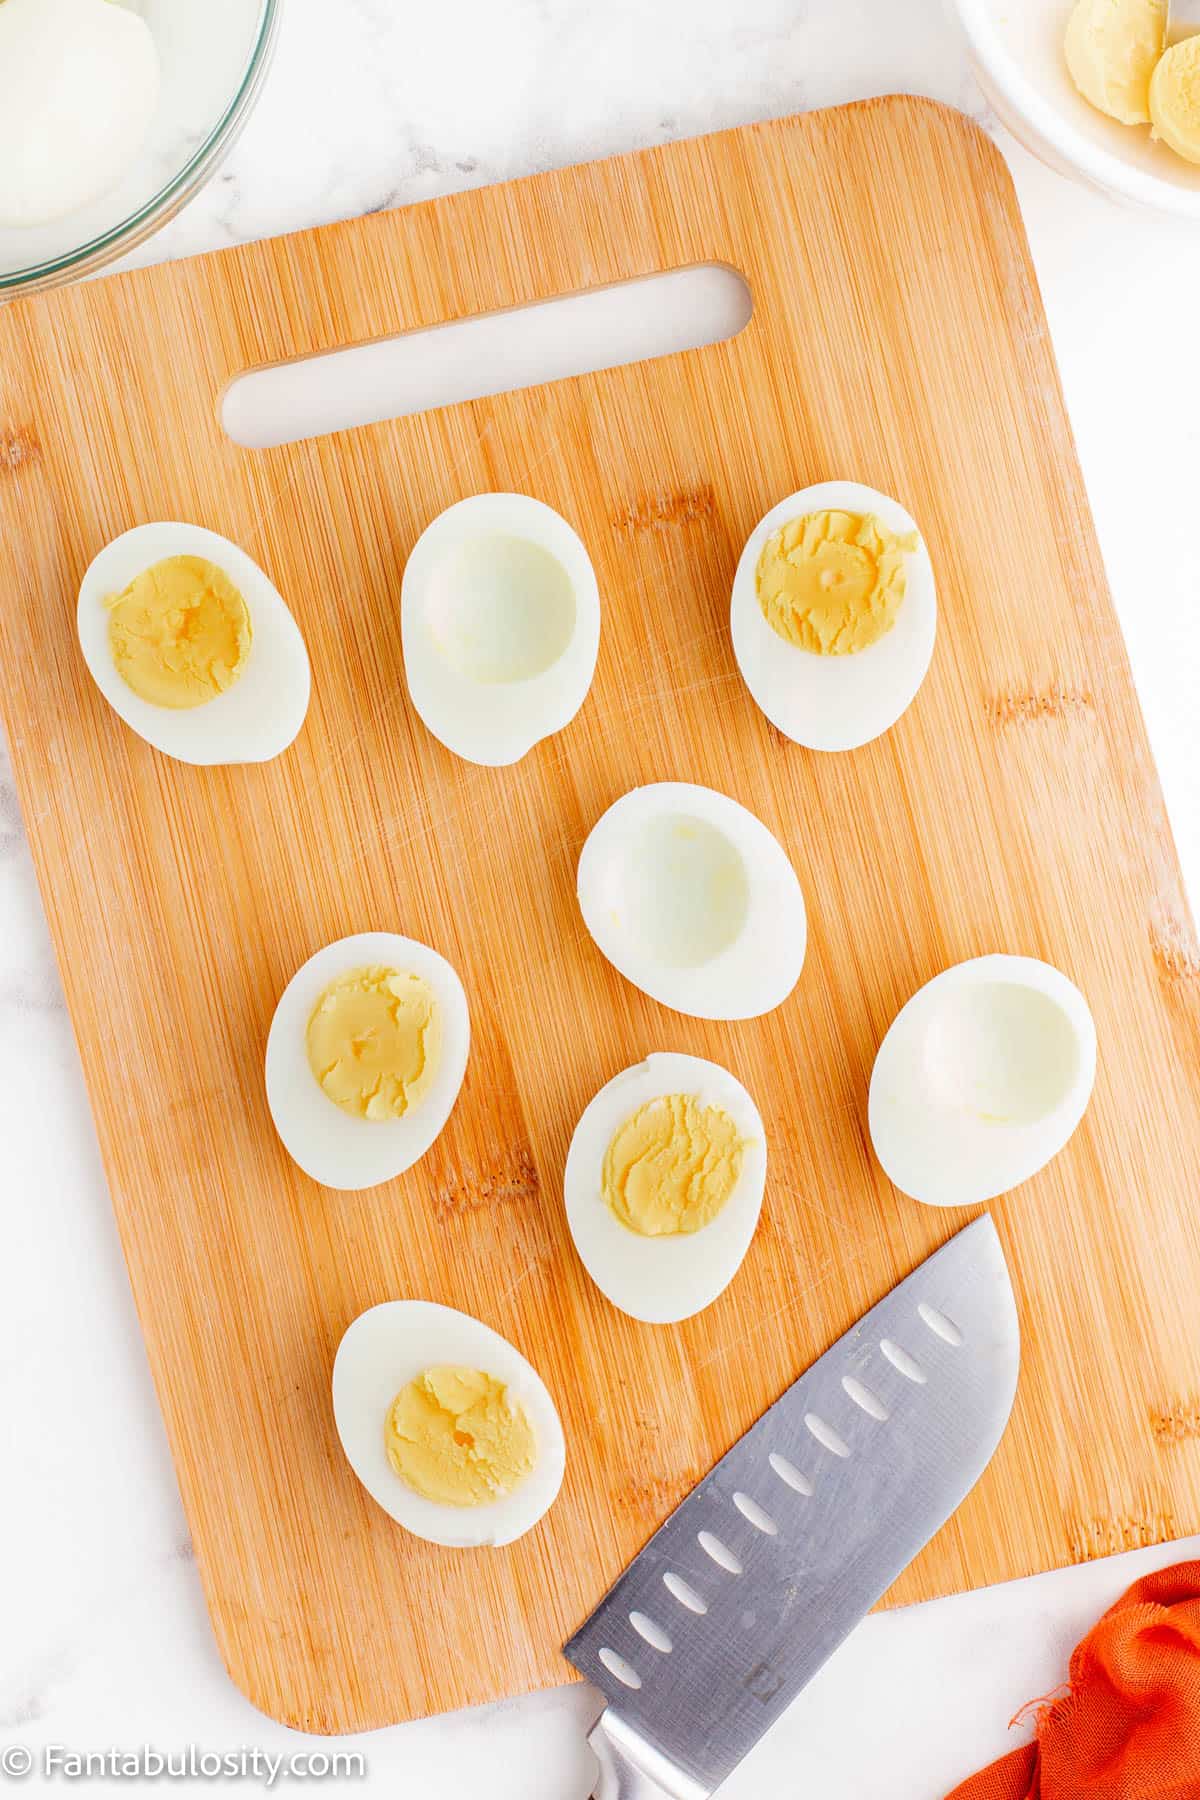 A wooden cutting board displays halved hard boiled eggs, some with the yolks removed